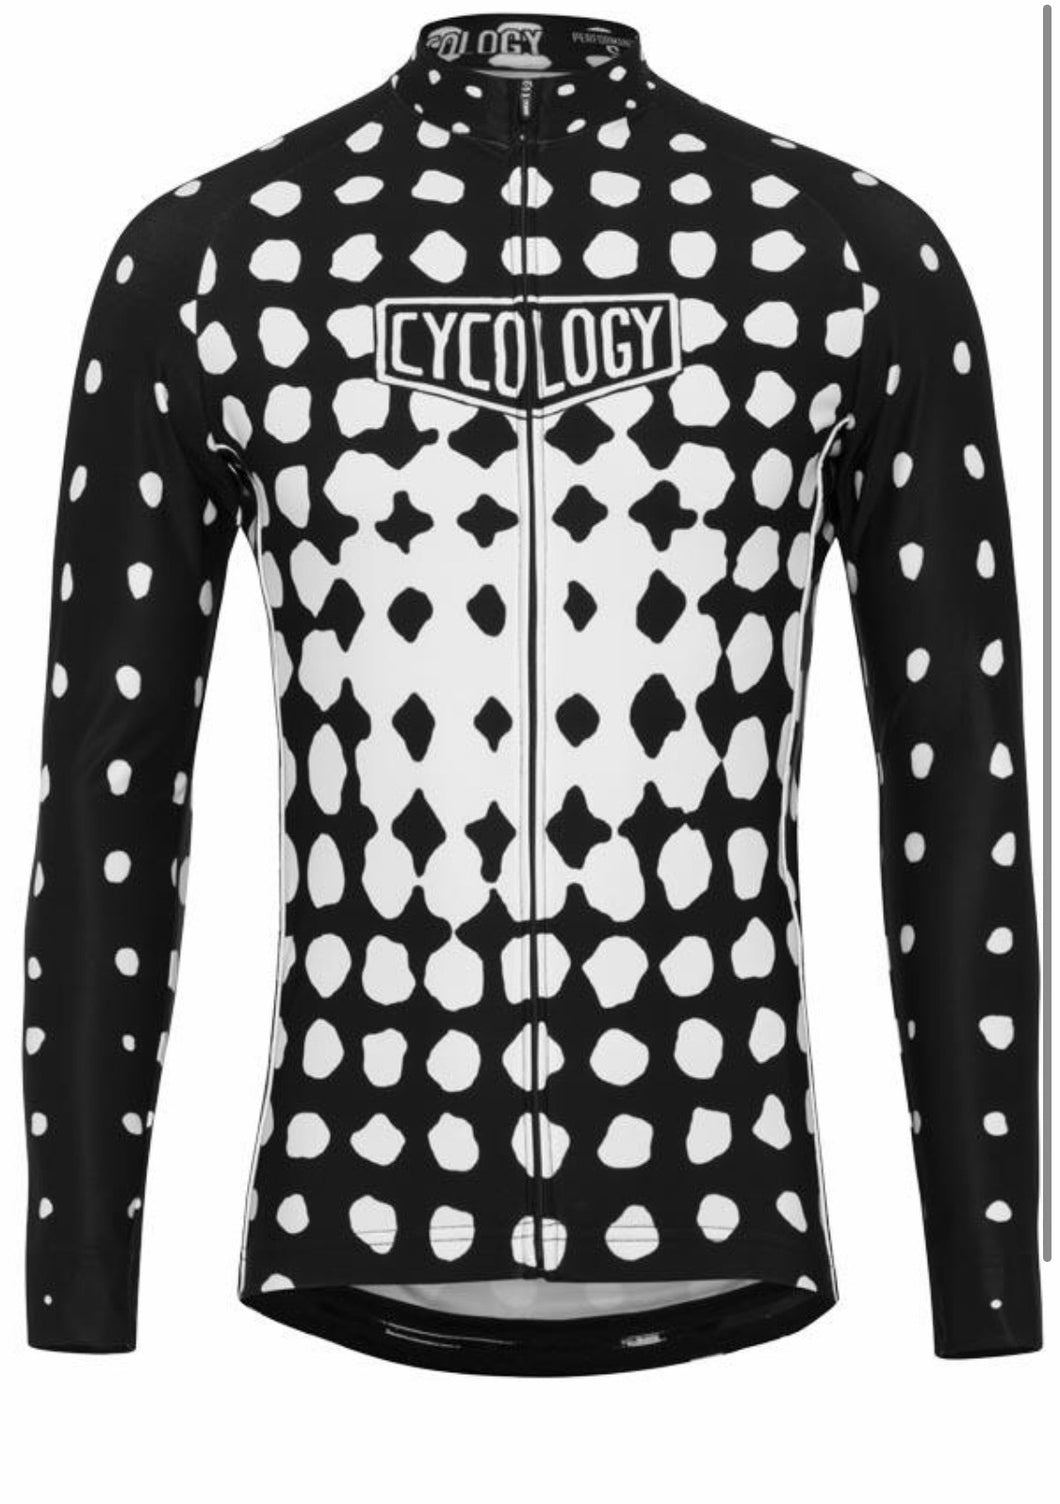 Cycology Quality Men's Long Sleeved Jersey - Design Spot Me